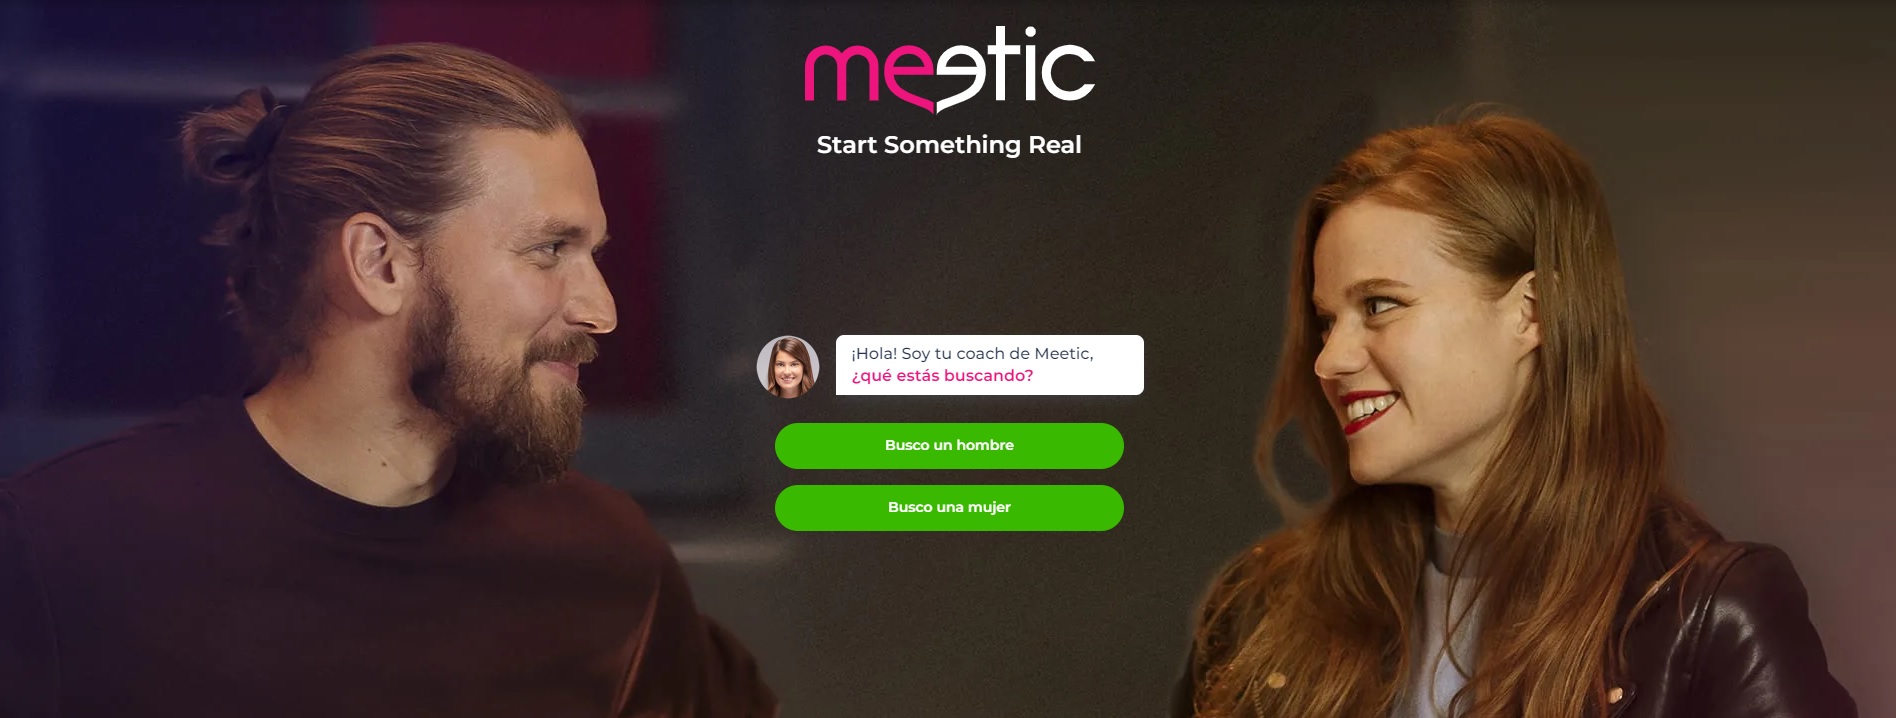 meetic-start-page